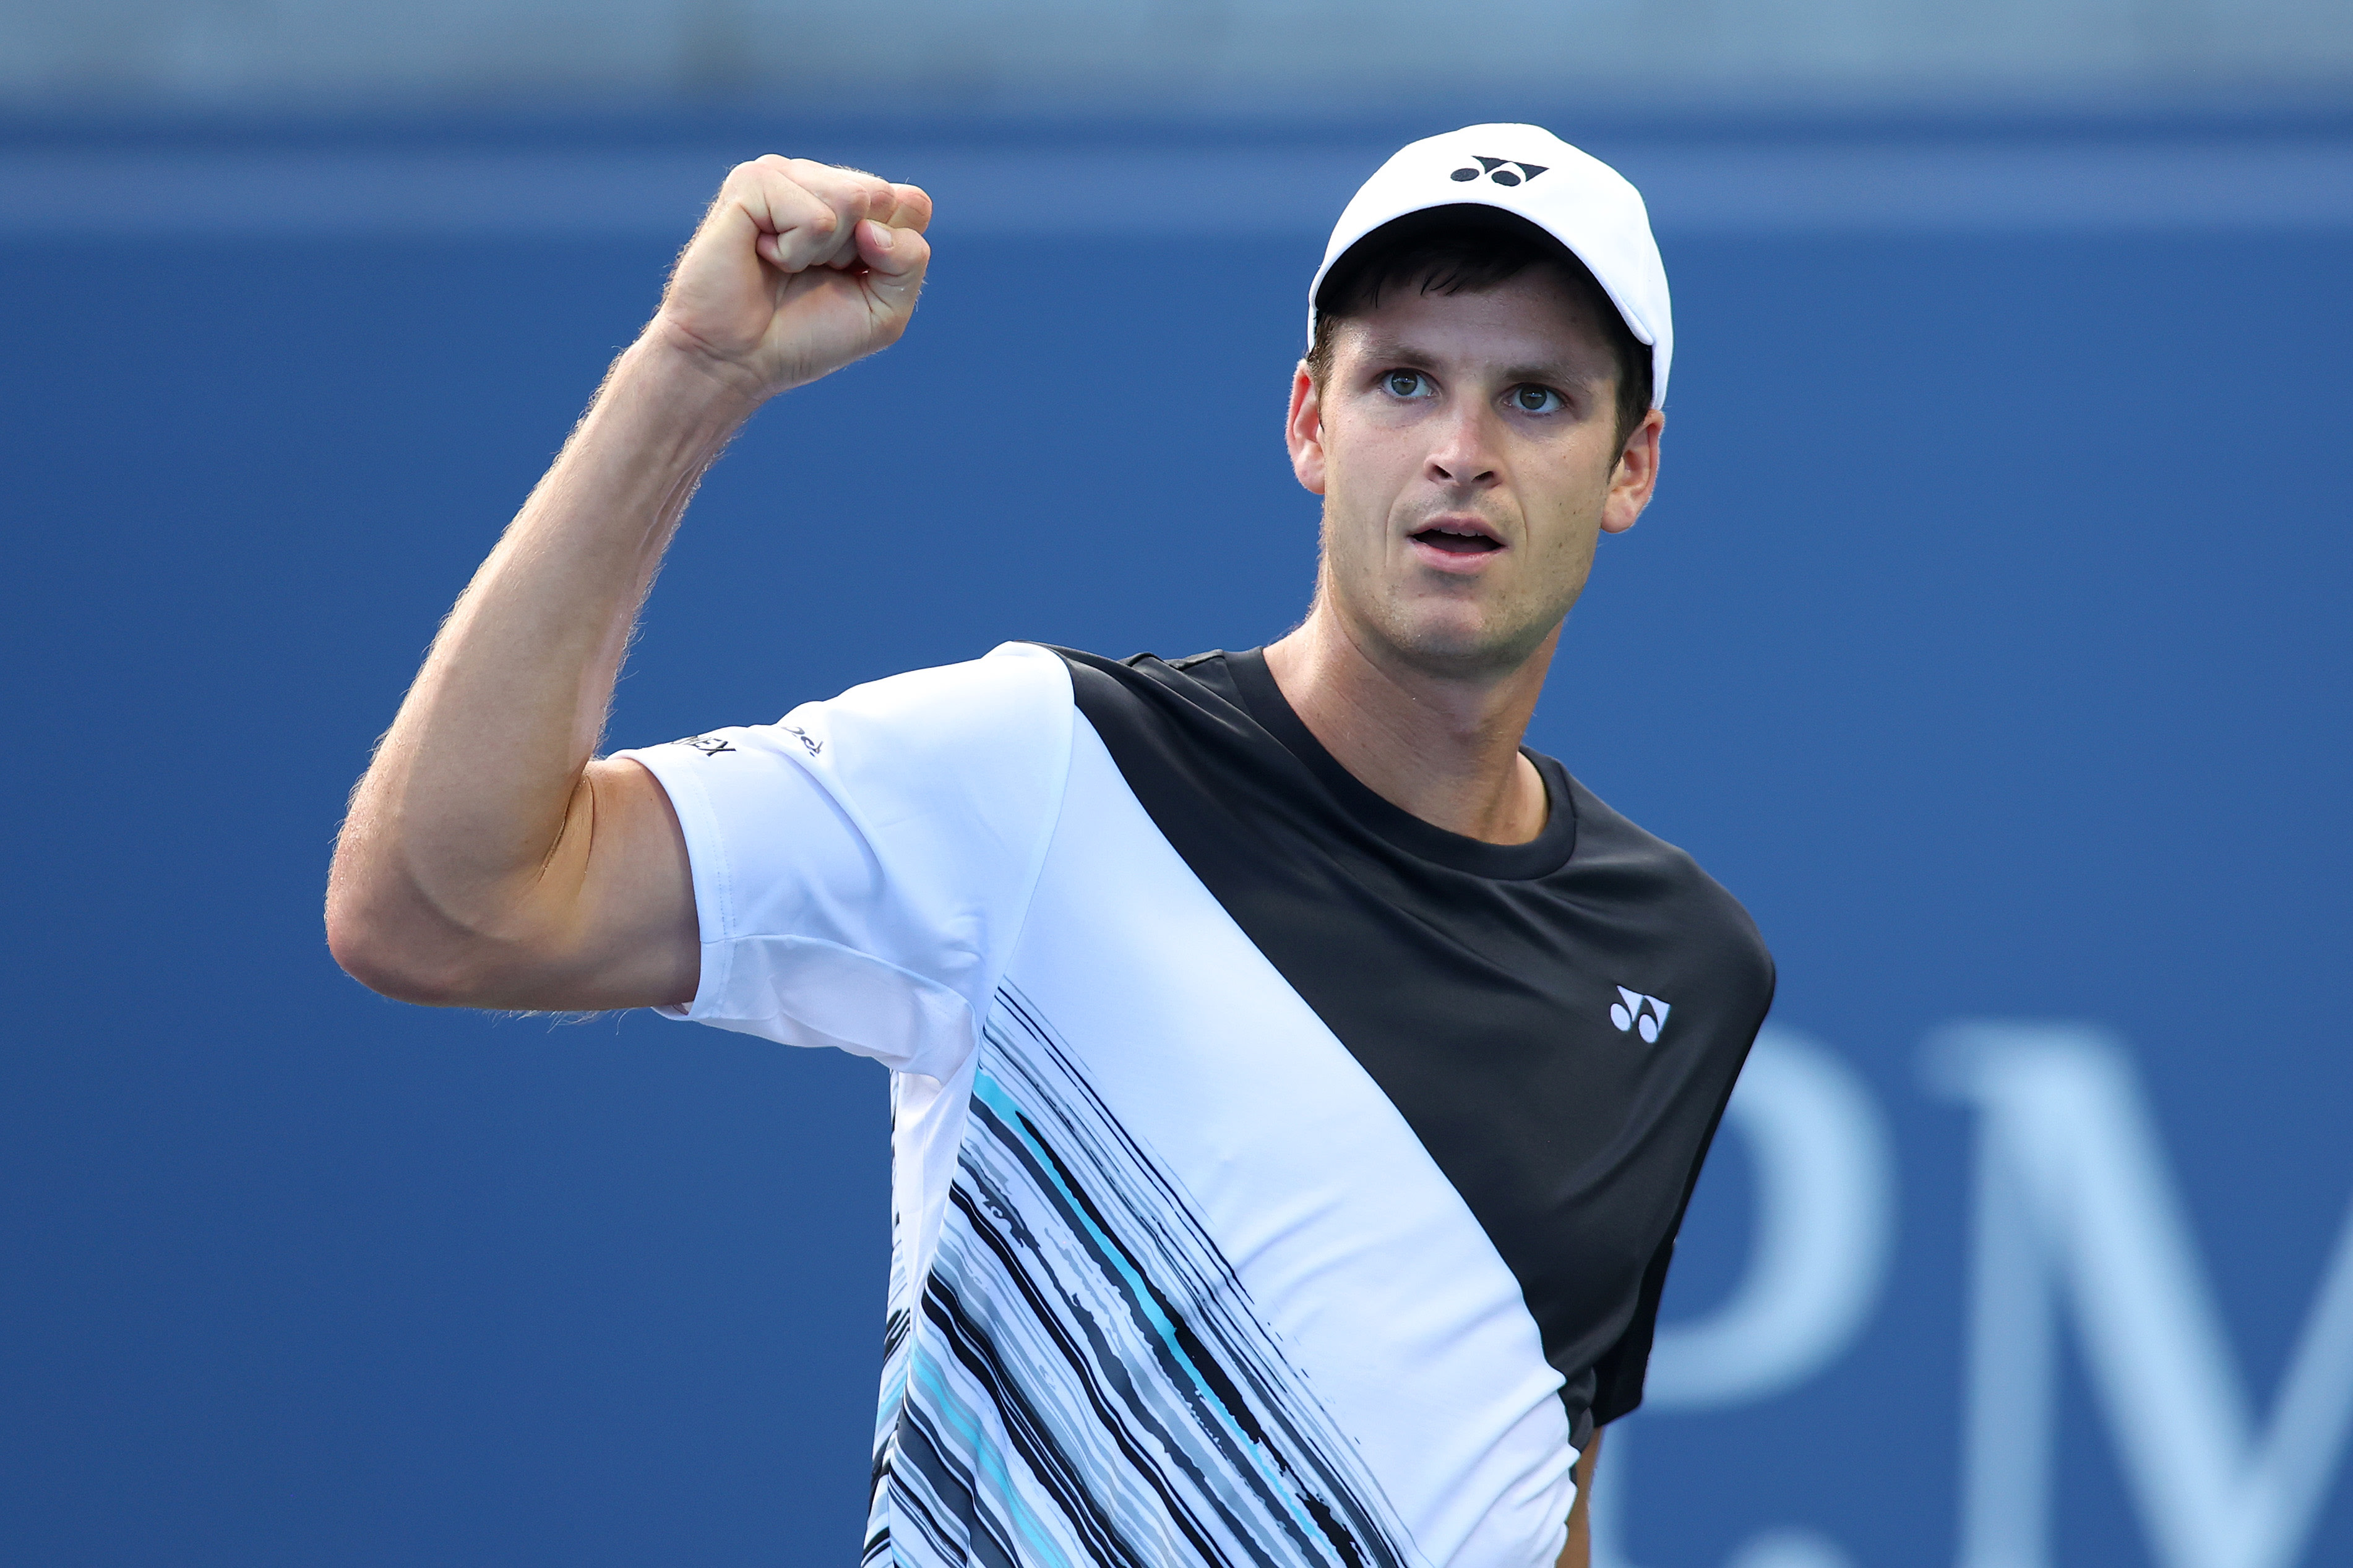 ZipRecruiter Player Resume Hubert Hurkacz, whose focus now shifts to the ATP Finals